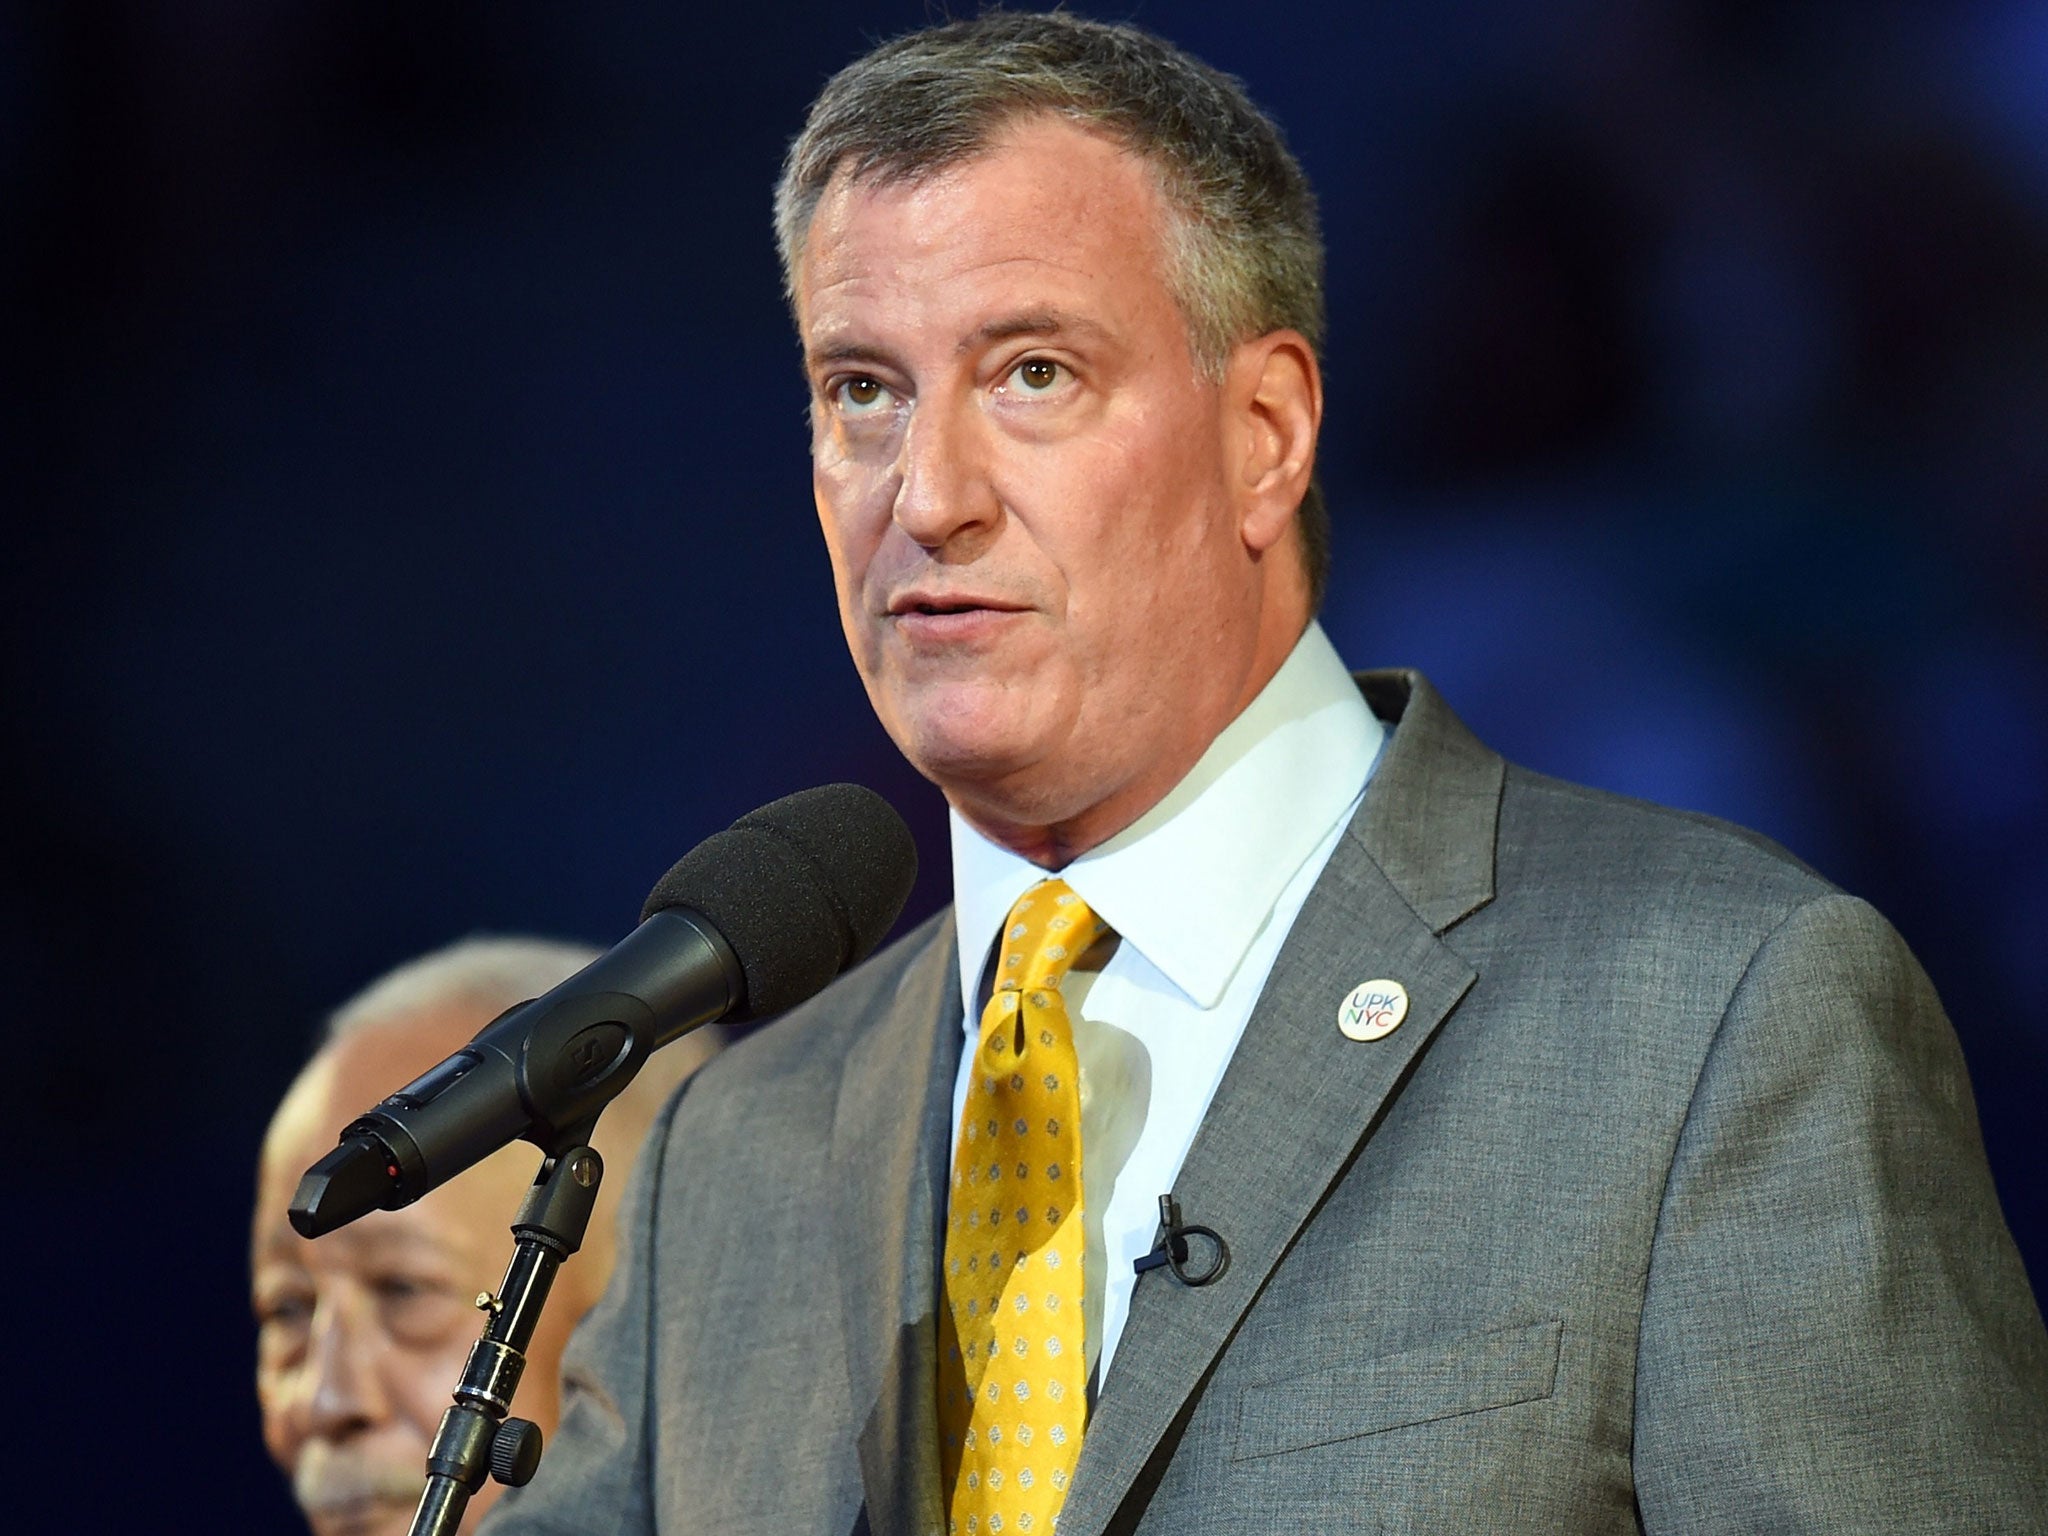 New York City Mayor Bill de Blasio, who took office less than a year ago on a promise to end so-called "poor doors"